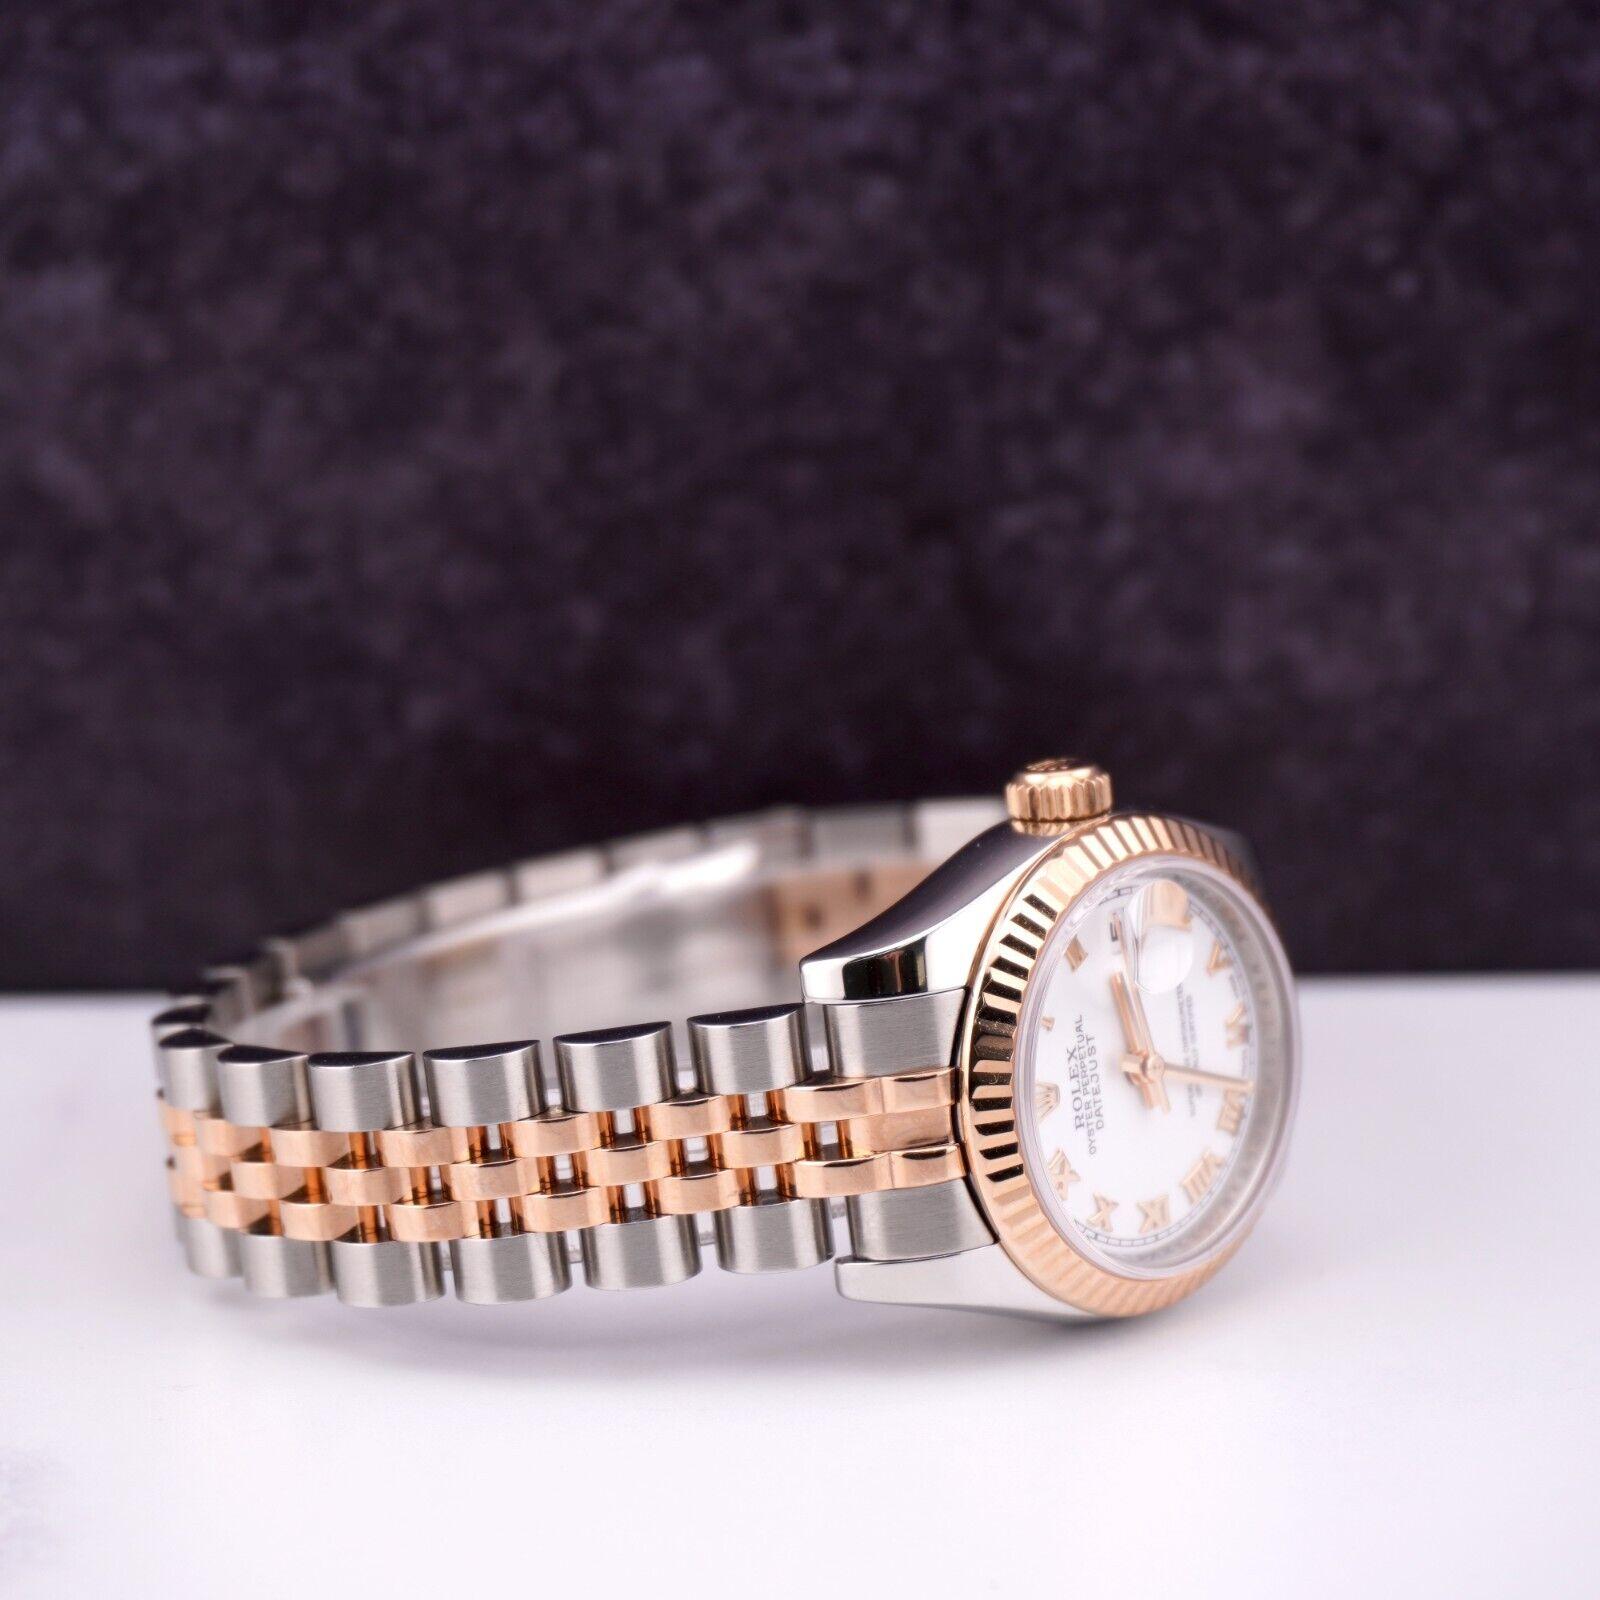 Rolex Datejust 26mm 18k Rose Gold & Steel Fluted Jubilee White Dial Watch 179171 In Excellent Condition For Sale In Pleasanton, CA